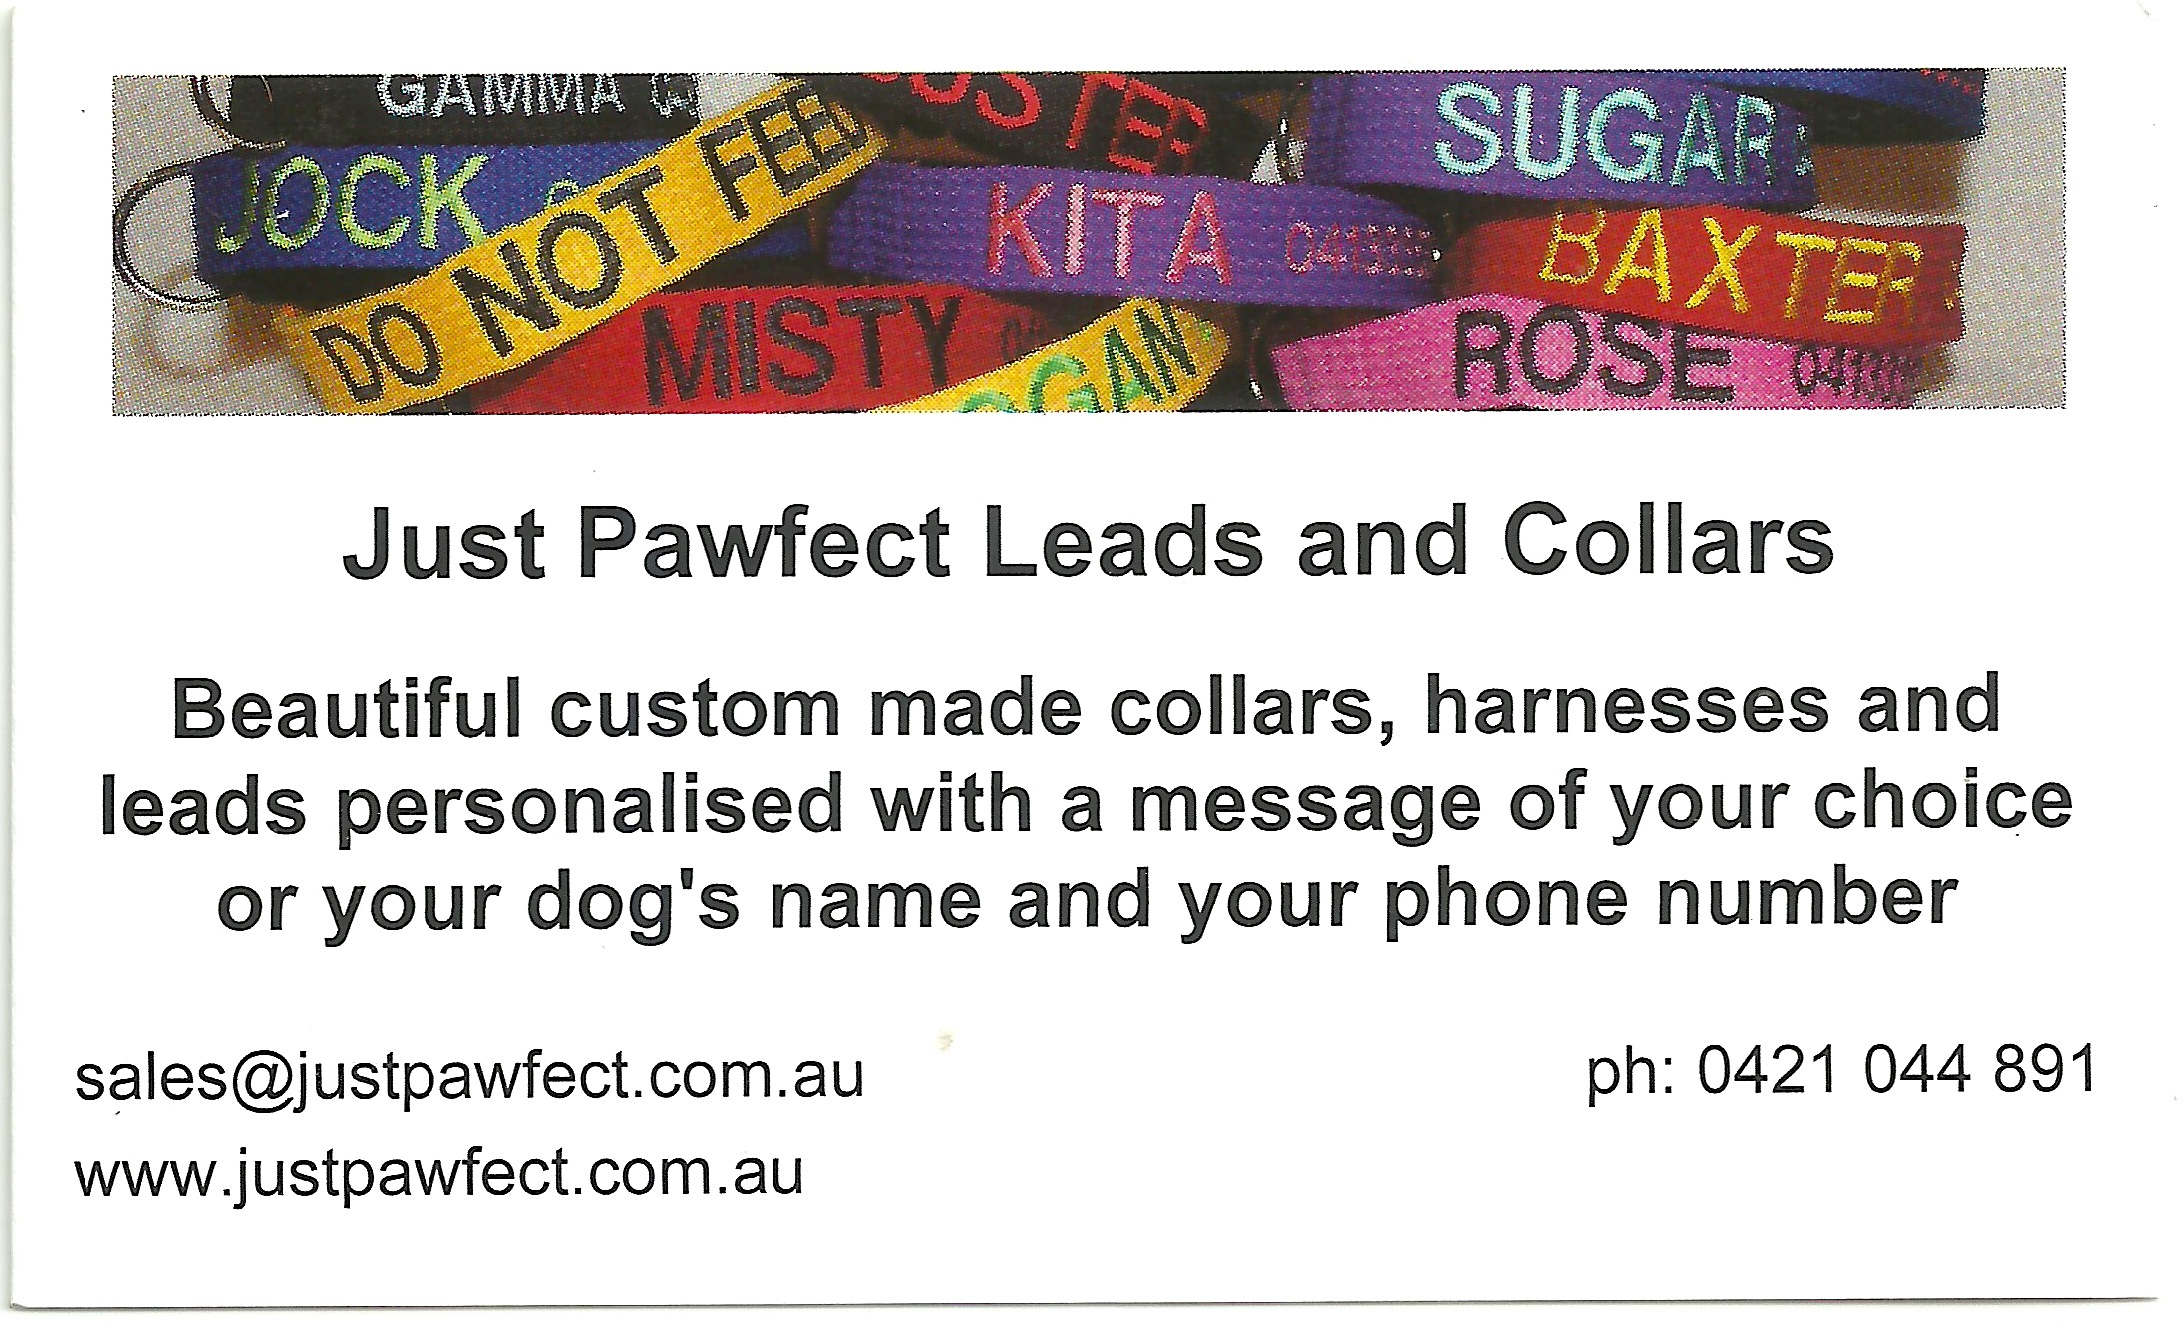 Just Pawfect Leads and Collars